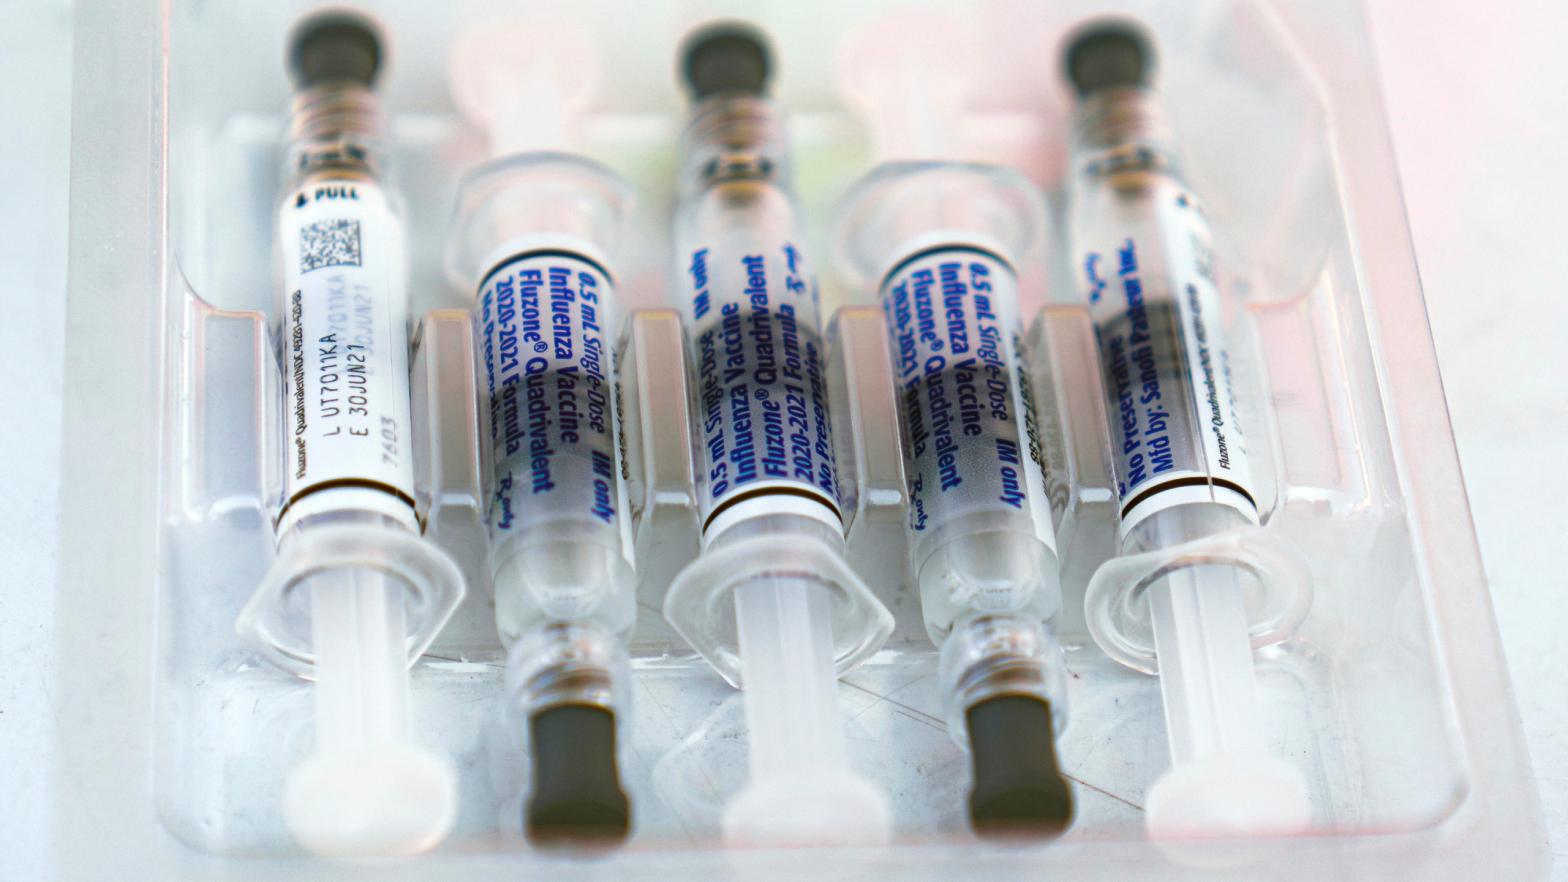 A box of influenza vaccines, about to be used during a free vaccination event in Los Angeles, California held October 17, 2020.  (Photo: Damian Dovarganes, AP)